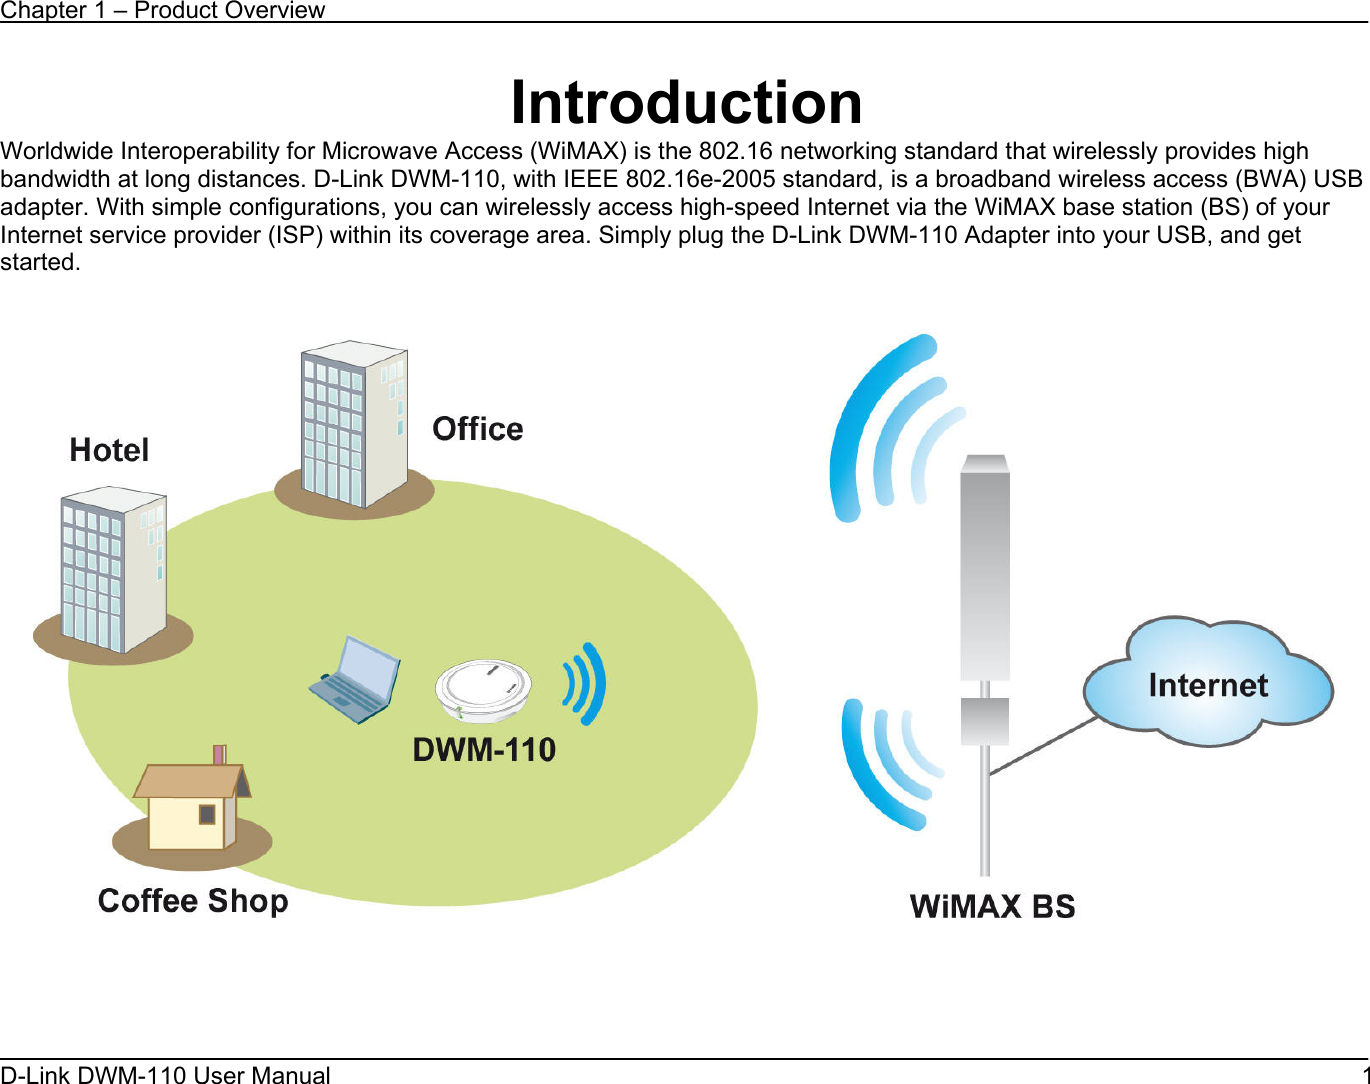 Chapter 1 – Product Overview D-Link DWM-110 User Manual   1 Introduction Worldwide Interoperability for Microwave Access (WiMAX) is the 802.16 networking standard that wirelessly provides high bandwidth at long distances. D-Link DWM-110, with IEEE 802.16e-2005 standard, is a broadband wireless access (BWA) USB adapter. With simple configurations, you can wirelessly access high-speed Internet via the WiMAX base station (BS) of your Internet service provider (ISP) within its coverage area. Simply plug the D-Link DWM-110 Adapter into your USB, and get started.       